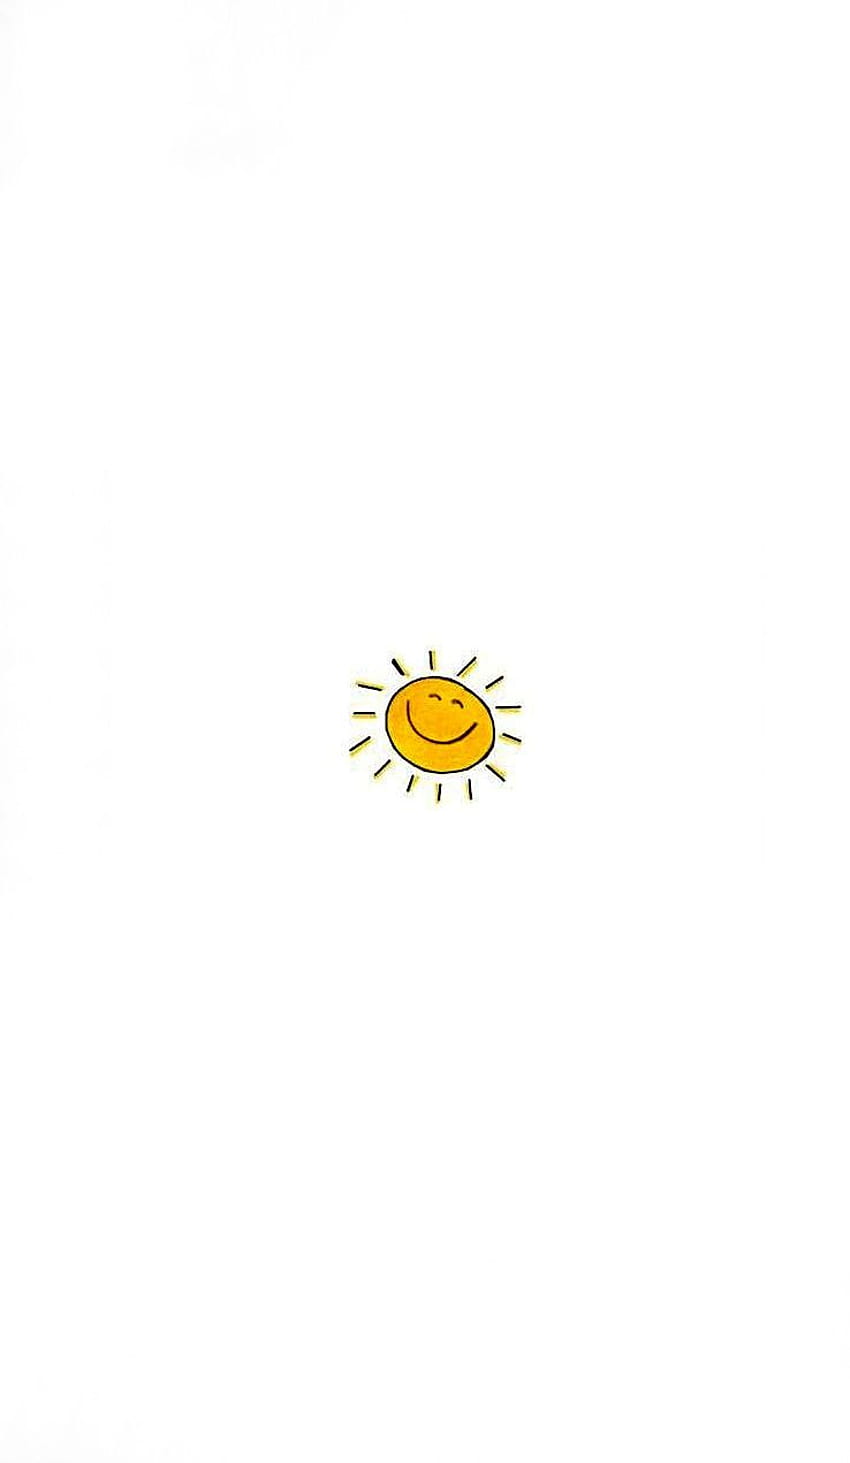 A sun drawn on the wall - Smile